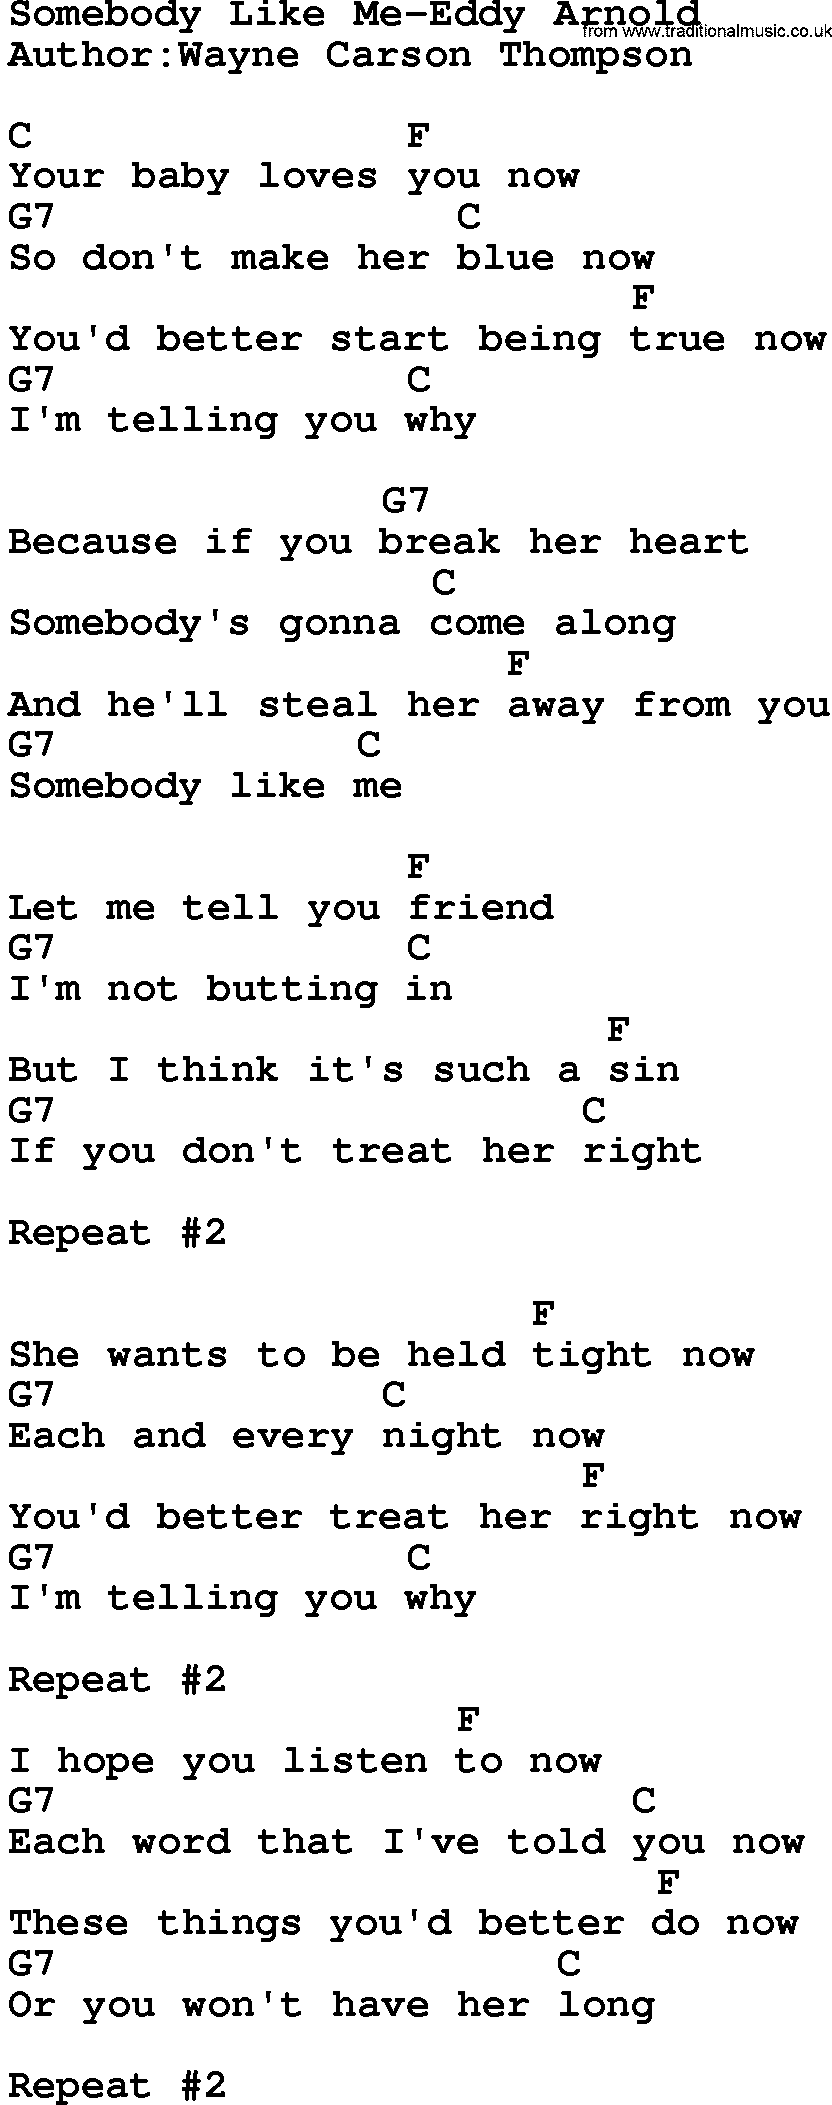 Country music song: Somebody Like Me-Eddy Arnold lyrics and chords